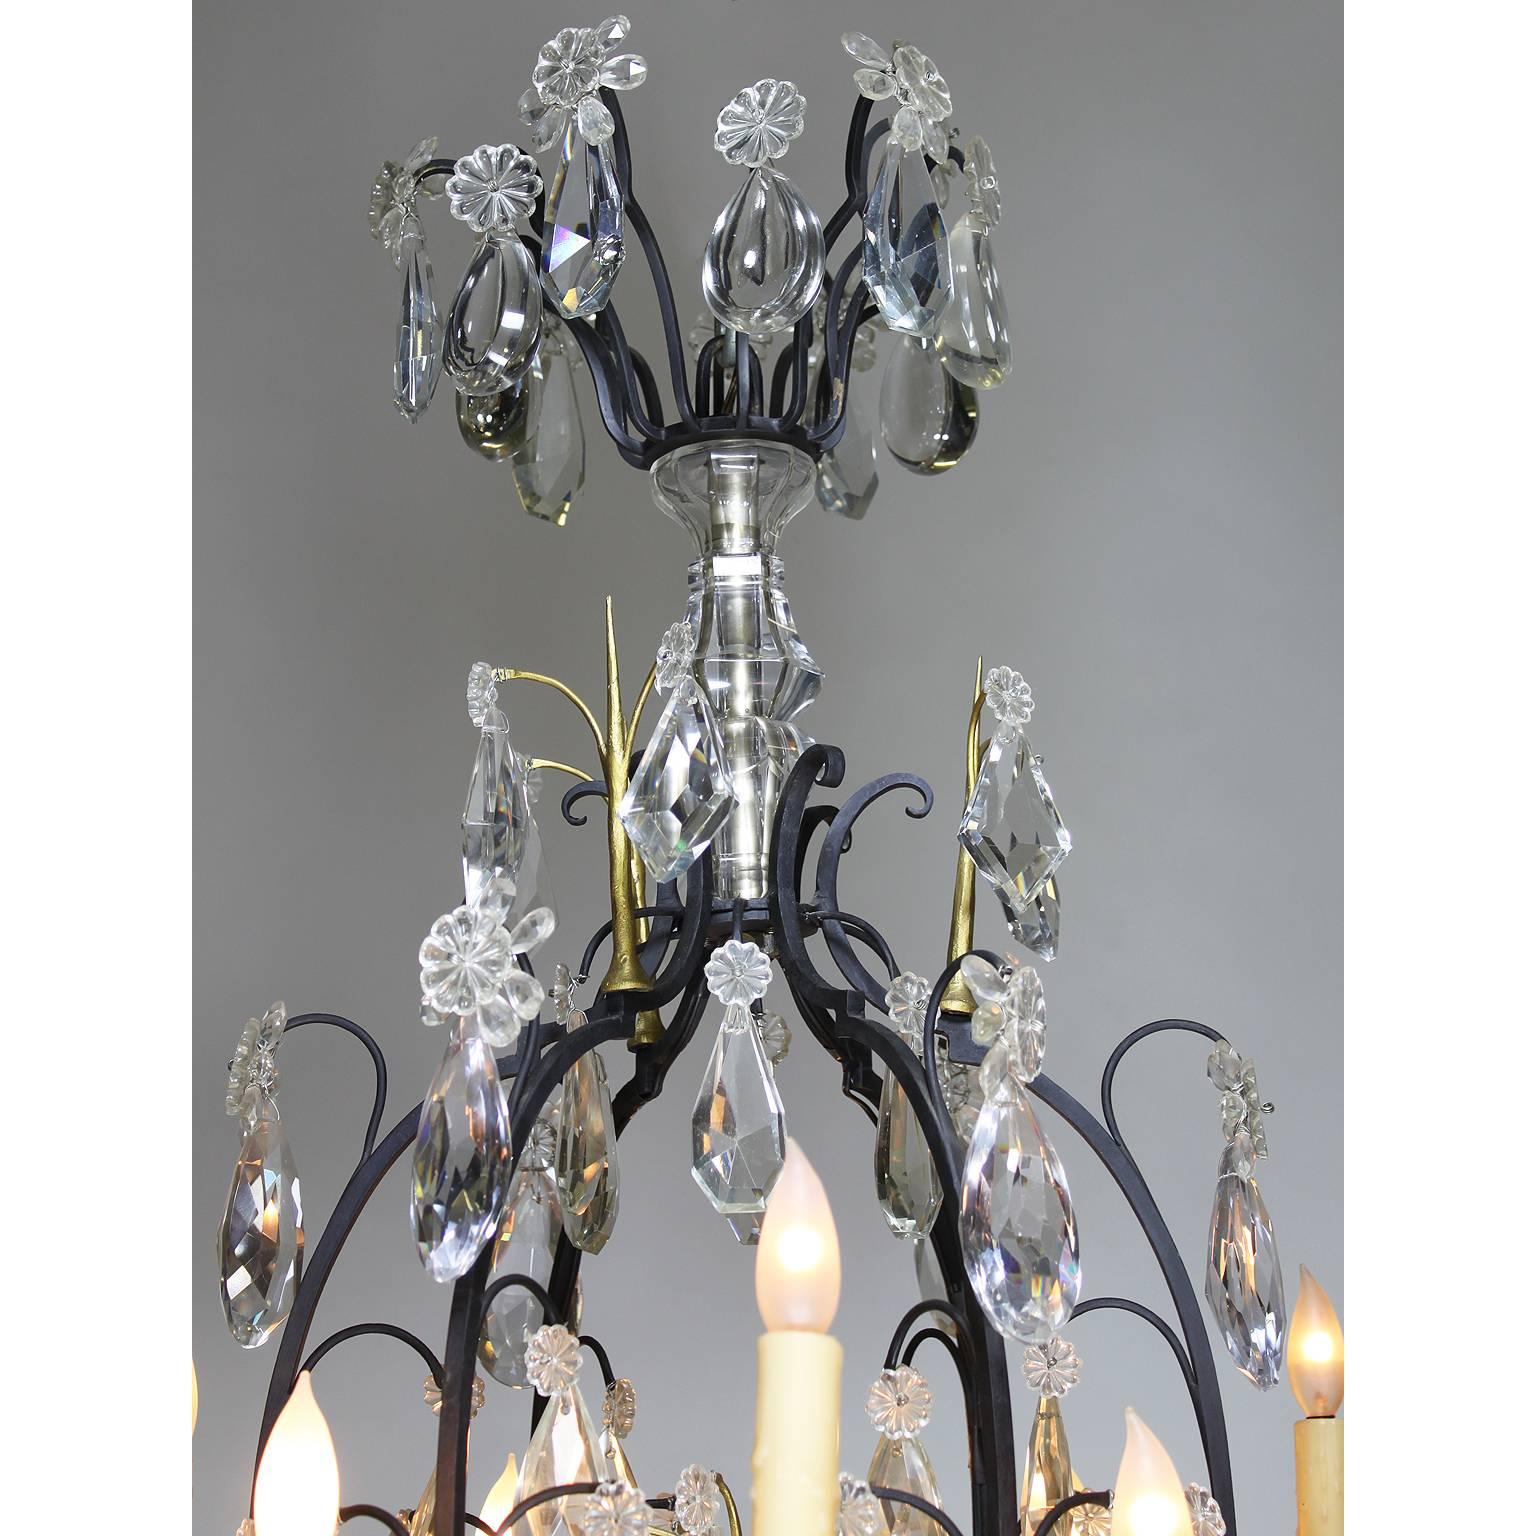 A French 19th-20th century Louis XV style wrought iron and parcel-gilt eighteen-light crystal (cut-glass) chandelier. The black painted frame with twelve candle arms and six interior parcel-gilt cups, all electrified, surmounted with crystal